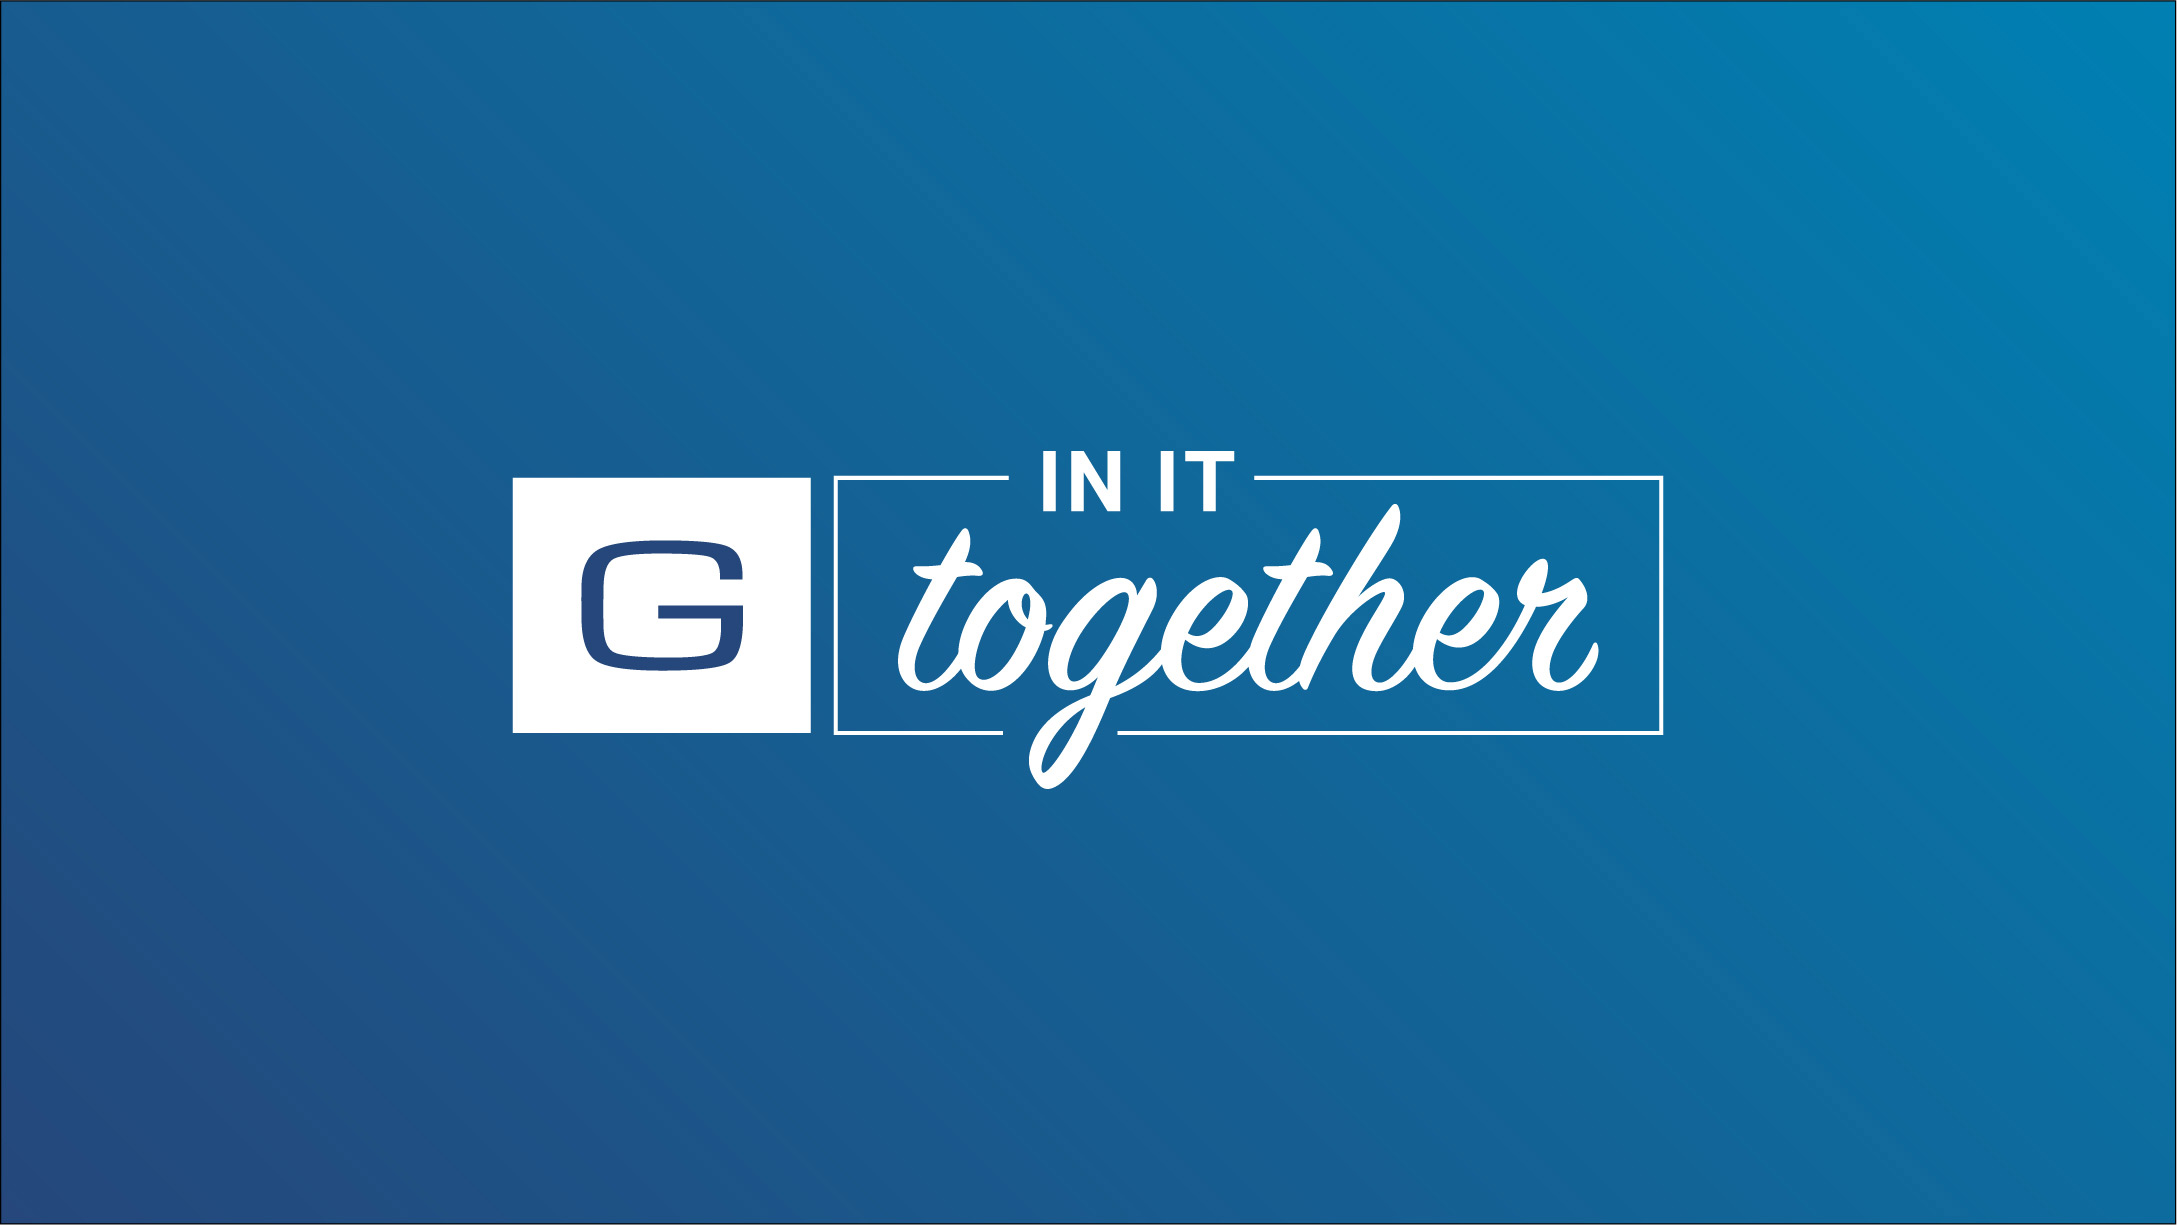 Geotab in it together logo on blue background